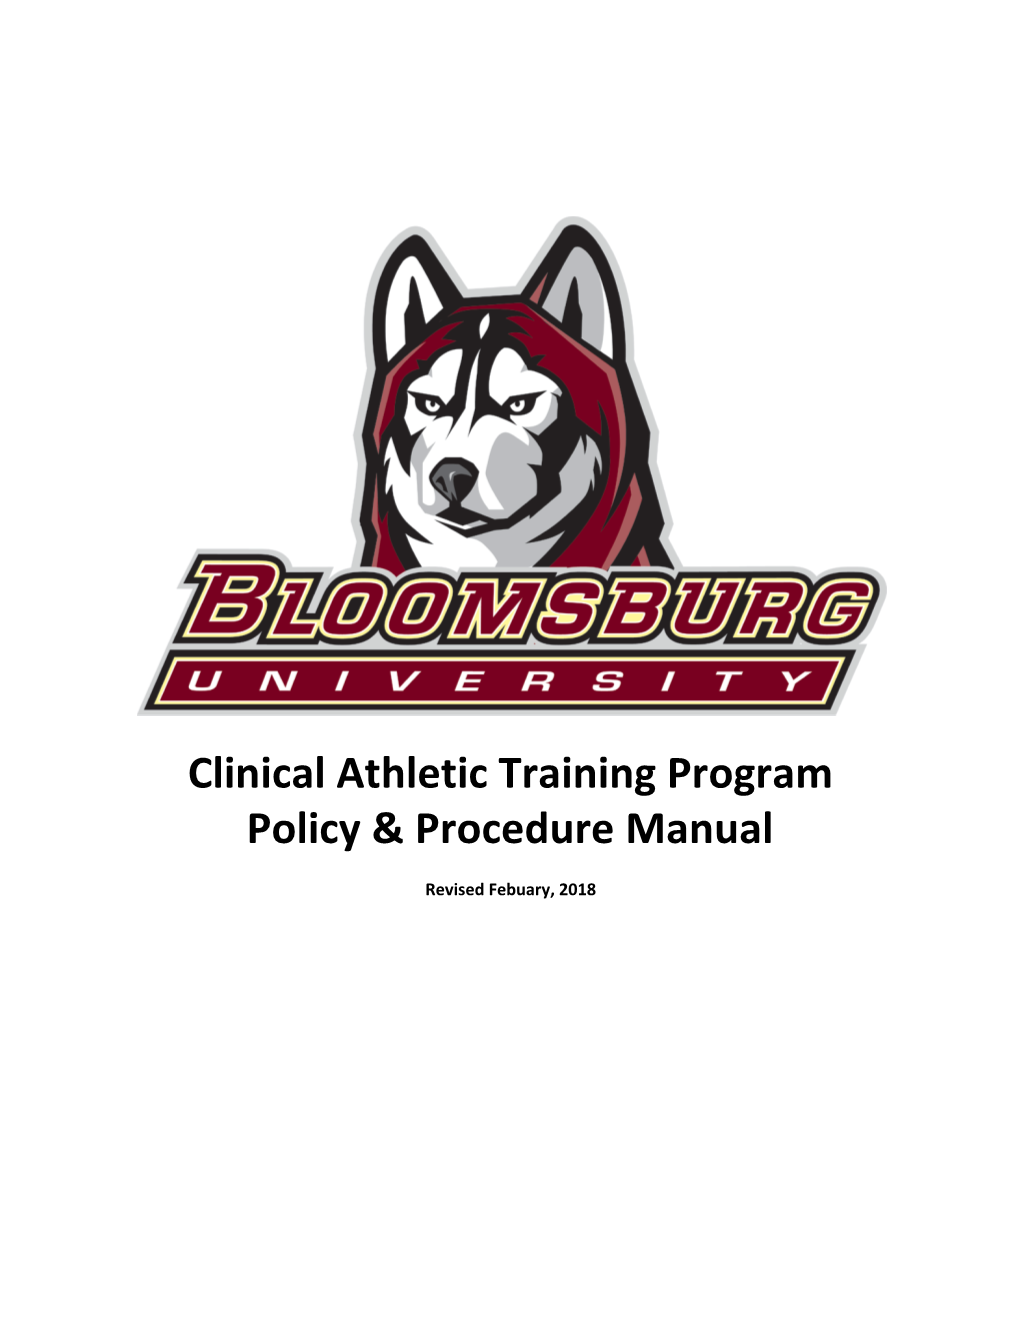 Clinical Athletic Training Program Policy & Procedure Manual